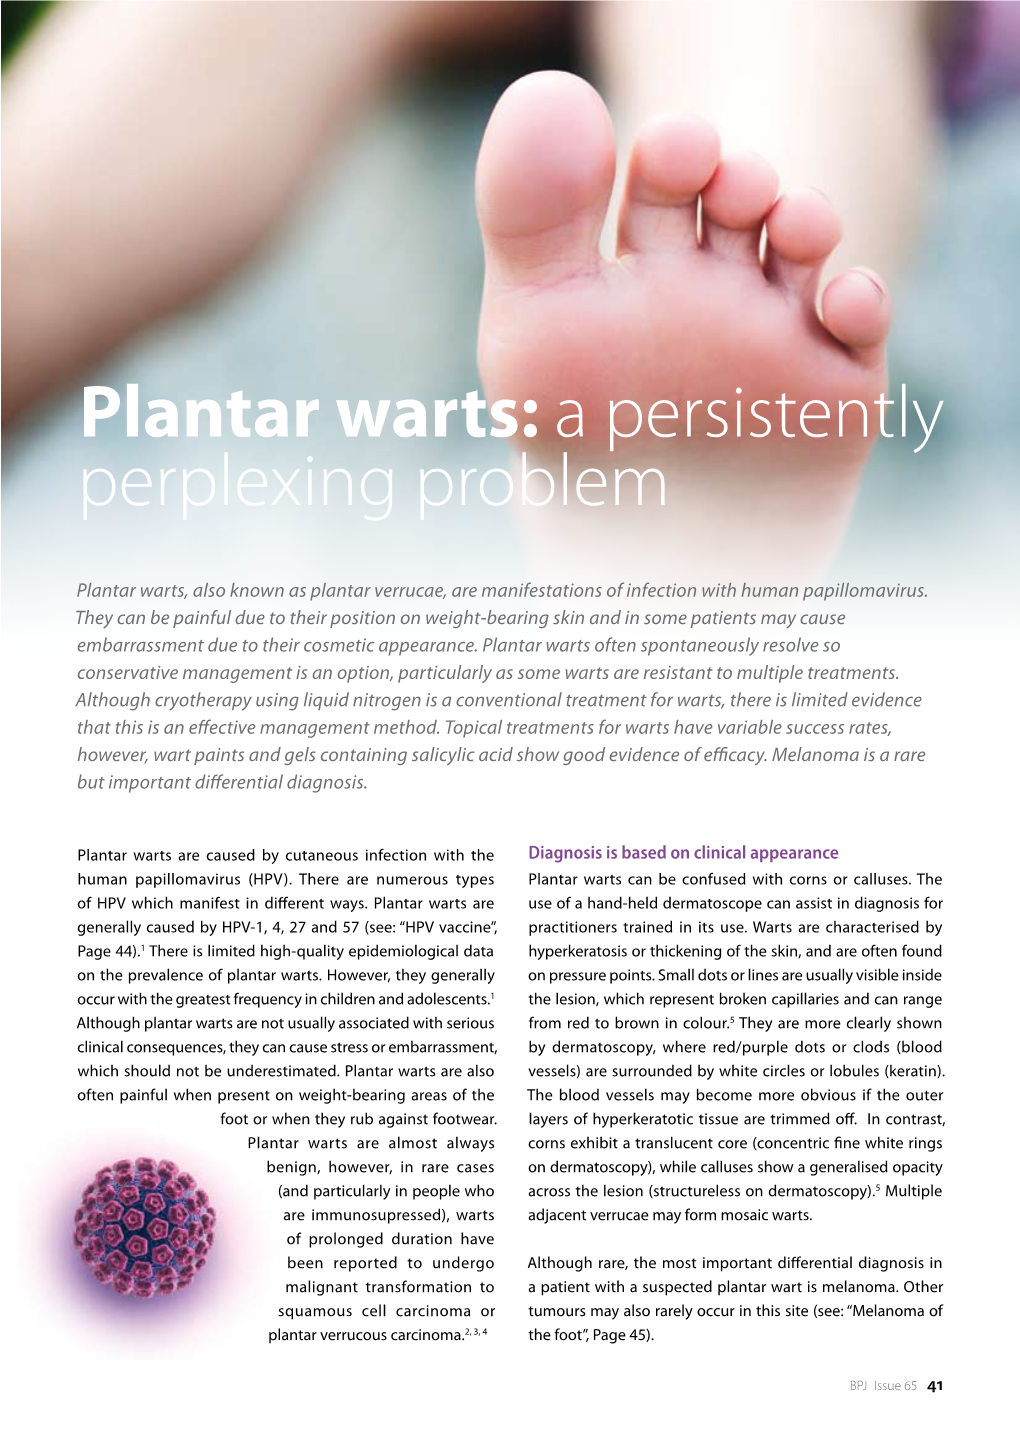 Plantar Warts: a Persistently Perplexing Problem